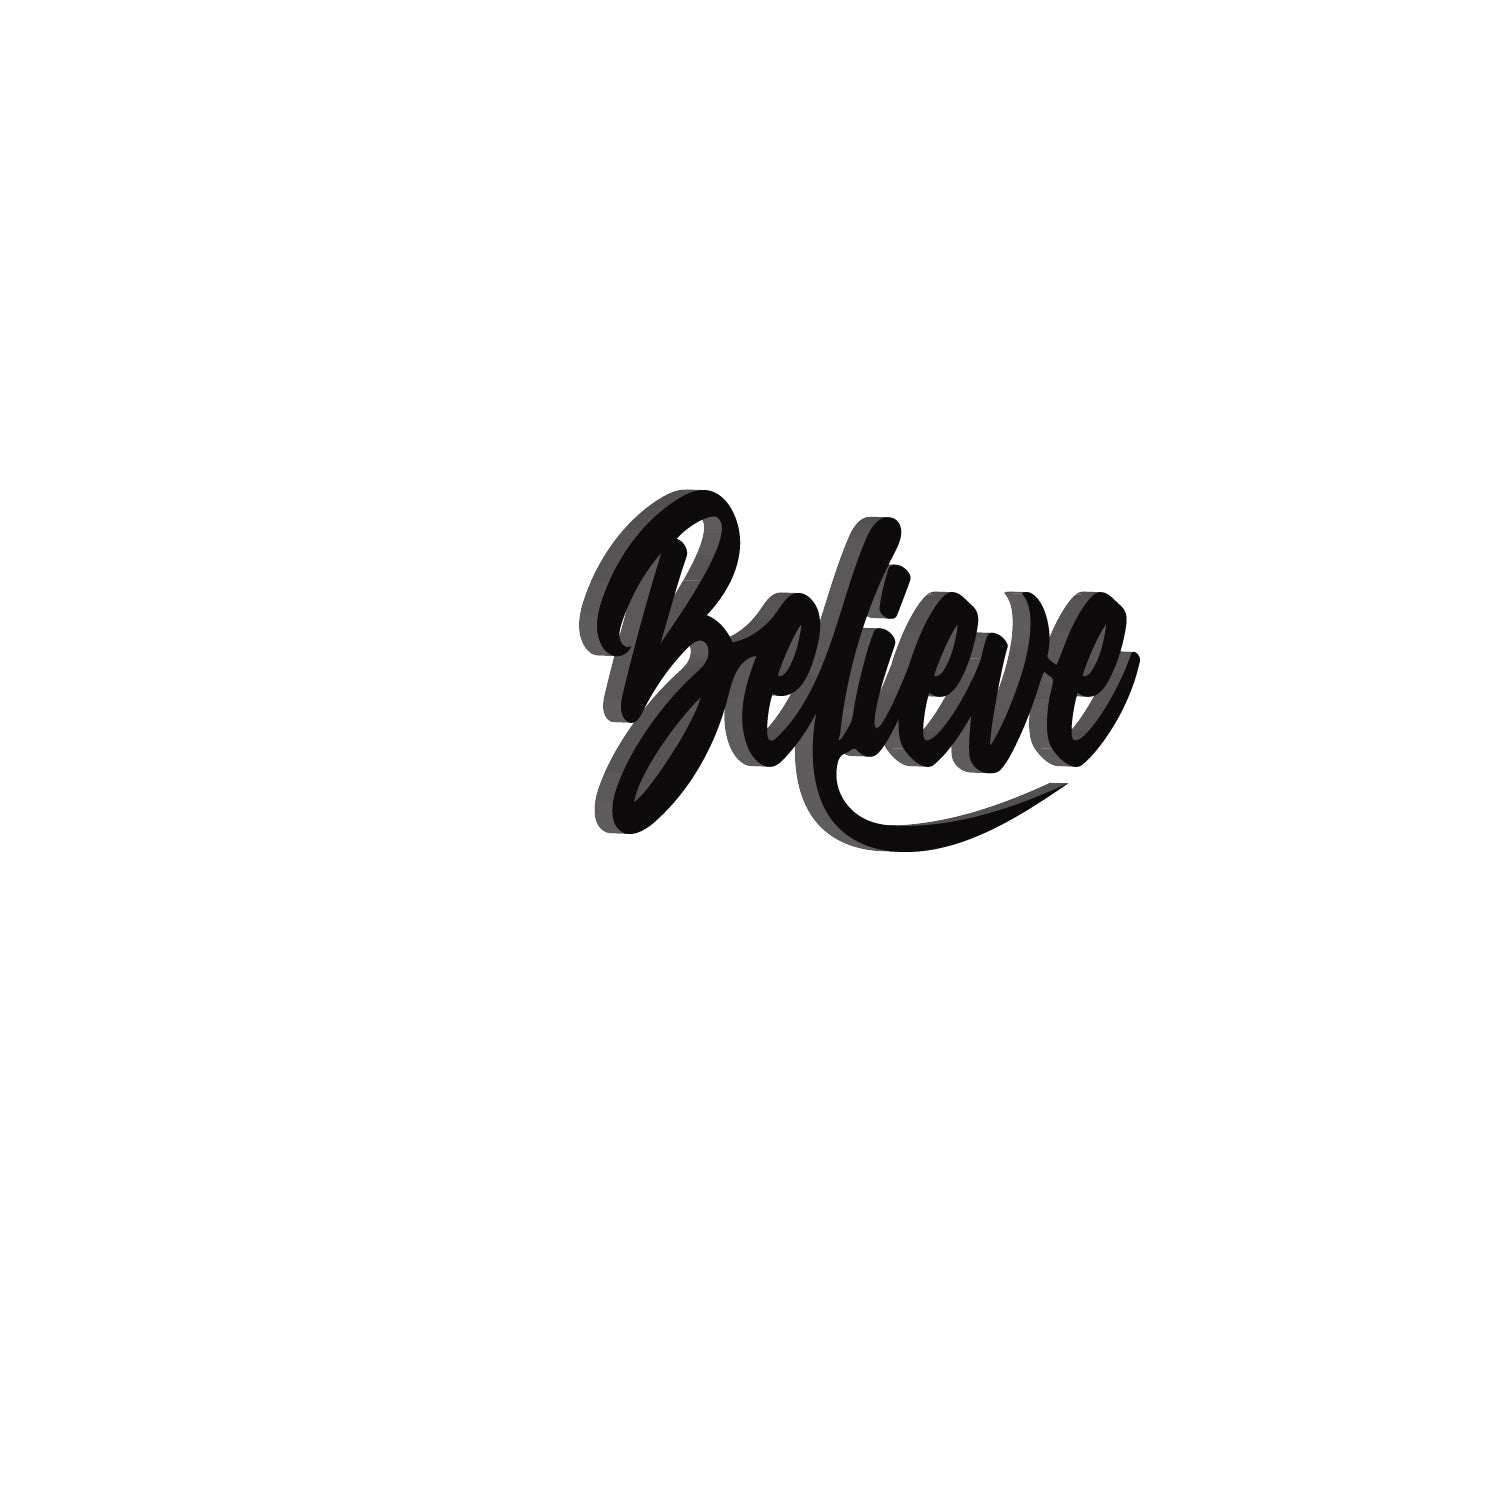 "Believe" Black Engineered Wood Wall Art Cutout, Ready to Hang Home Decor 1